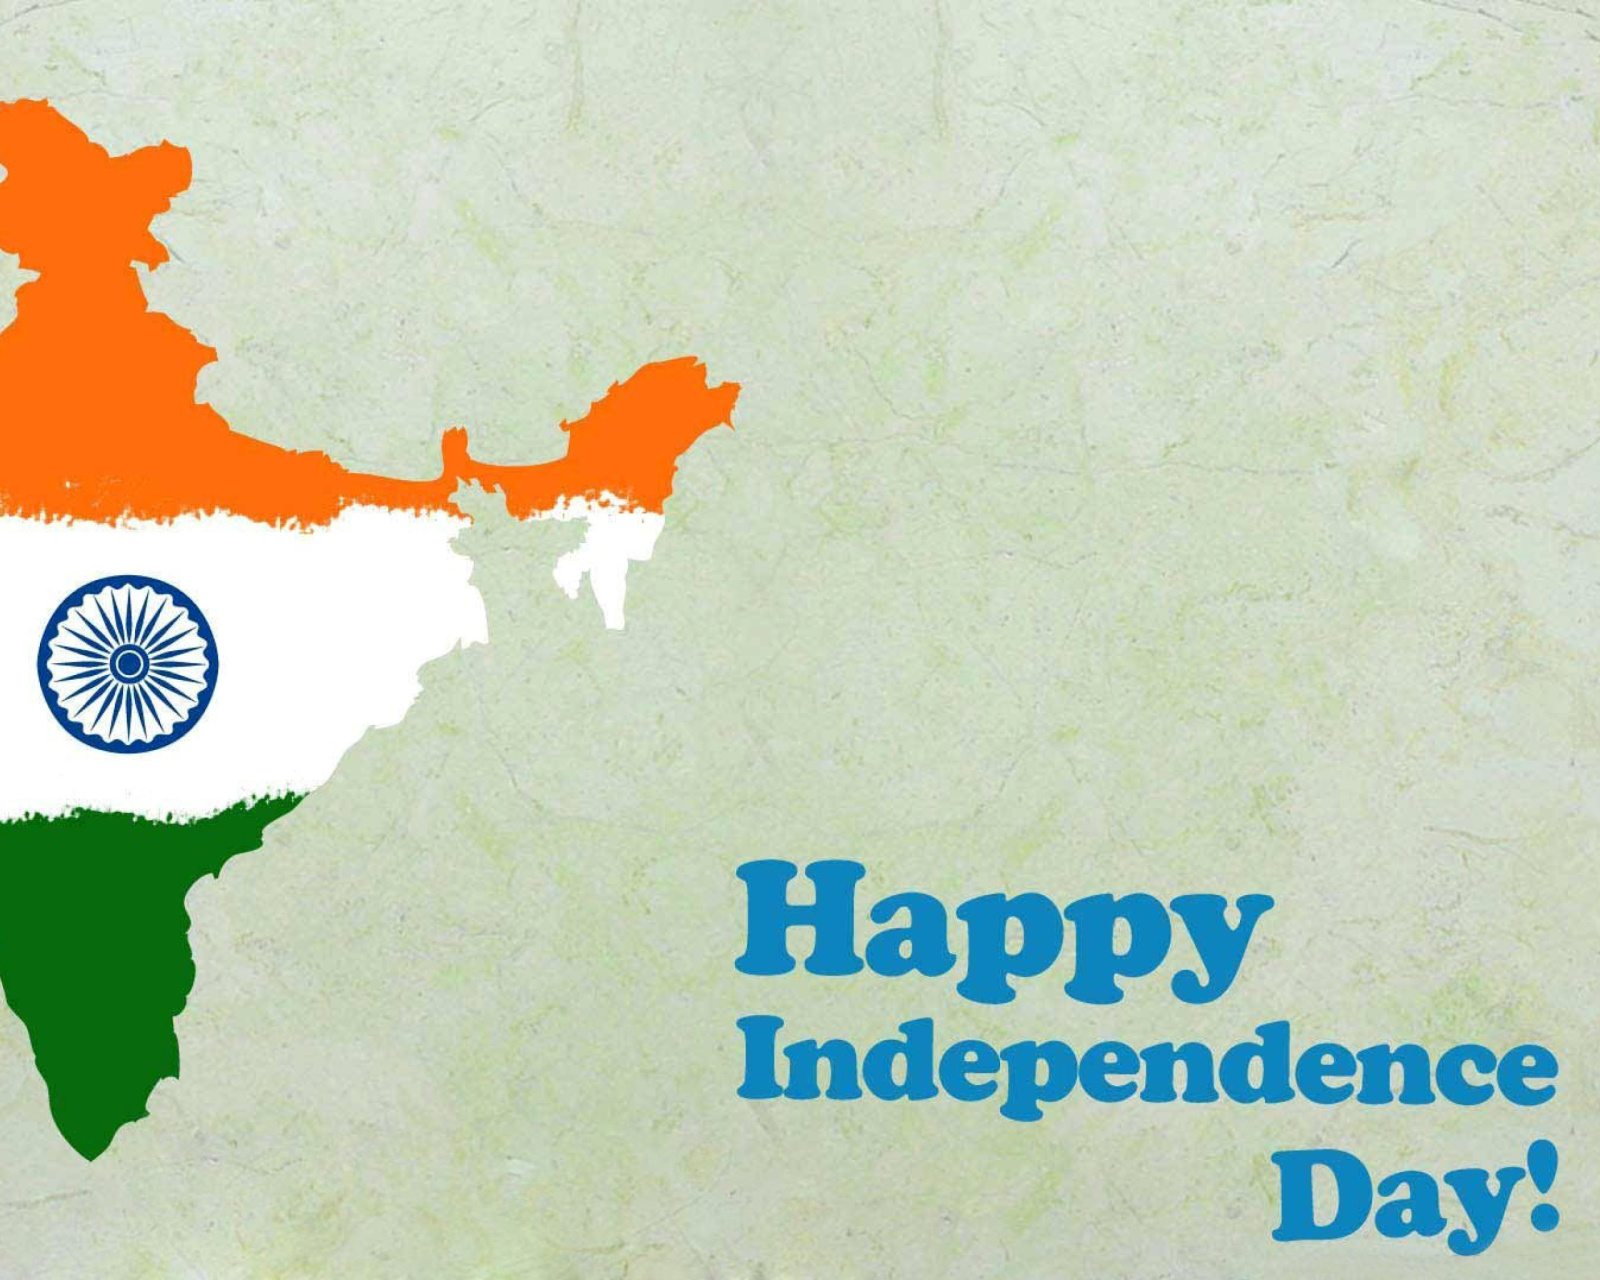 Happy Independence Day India screenshot #1 1600x1280